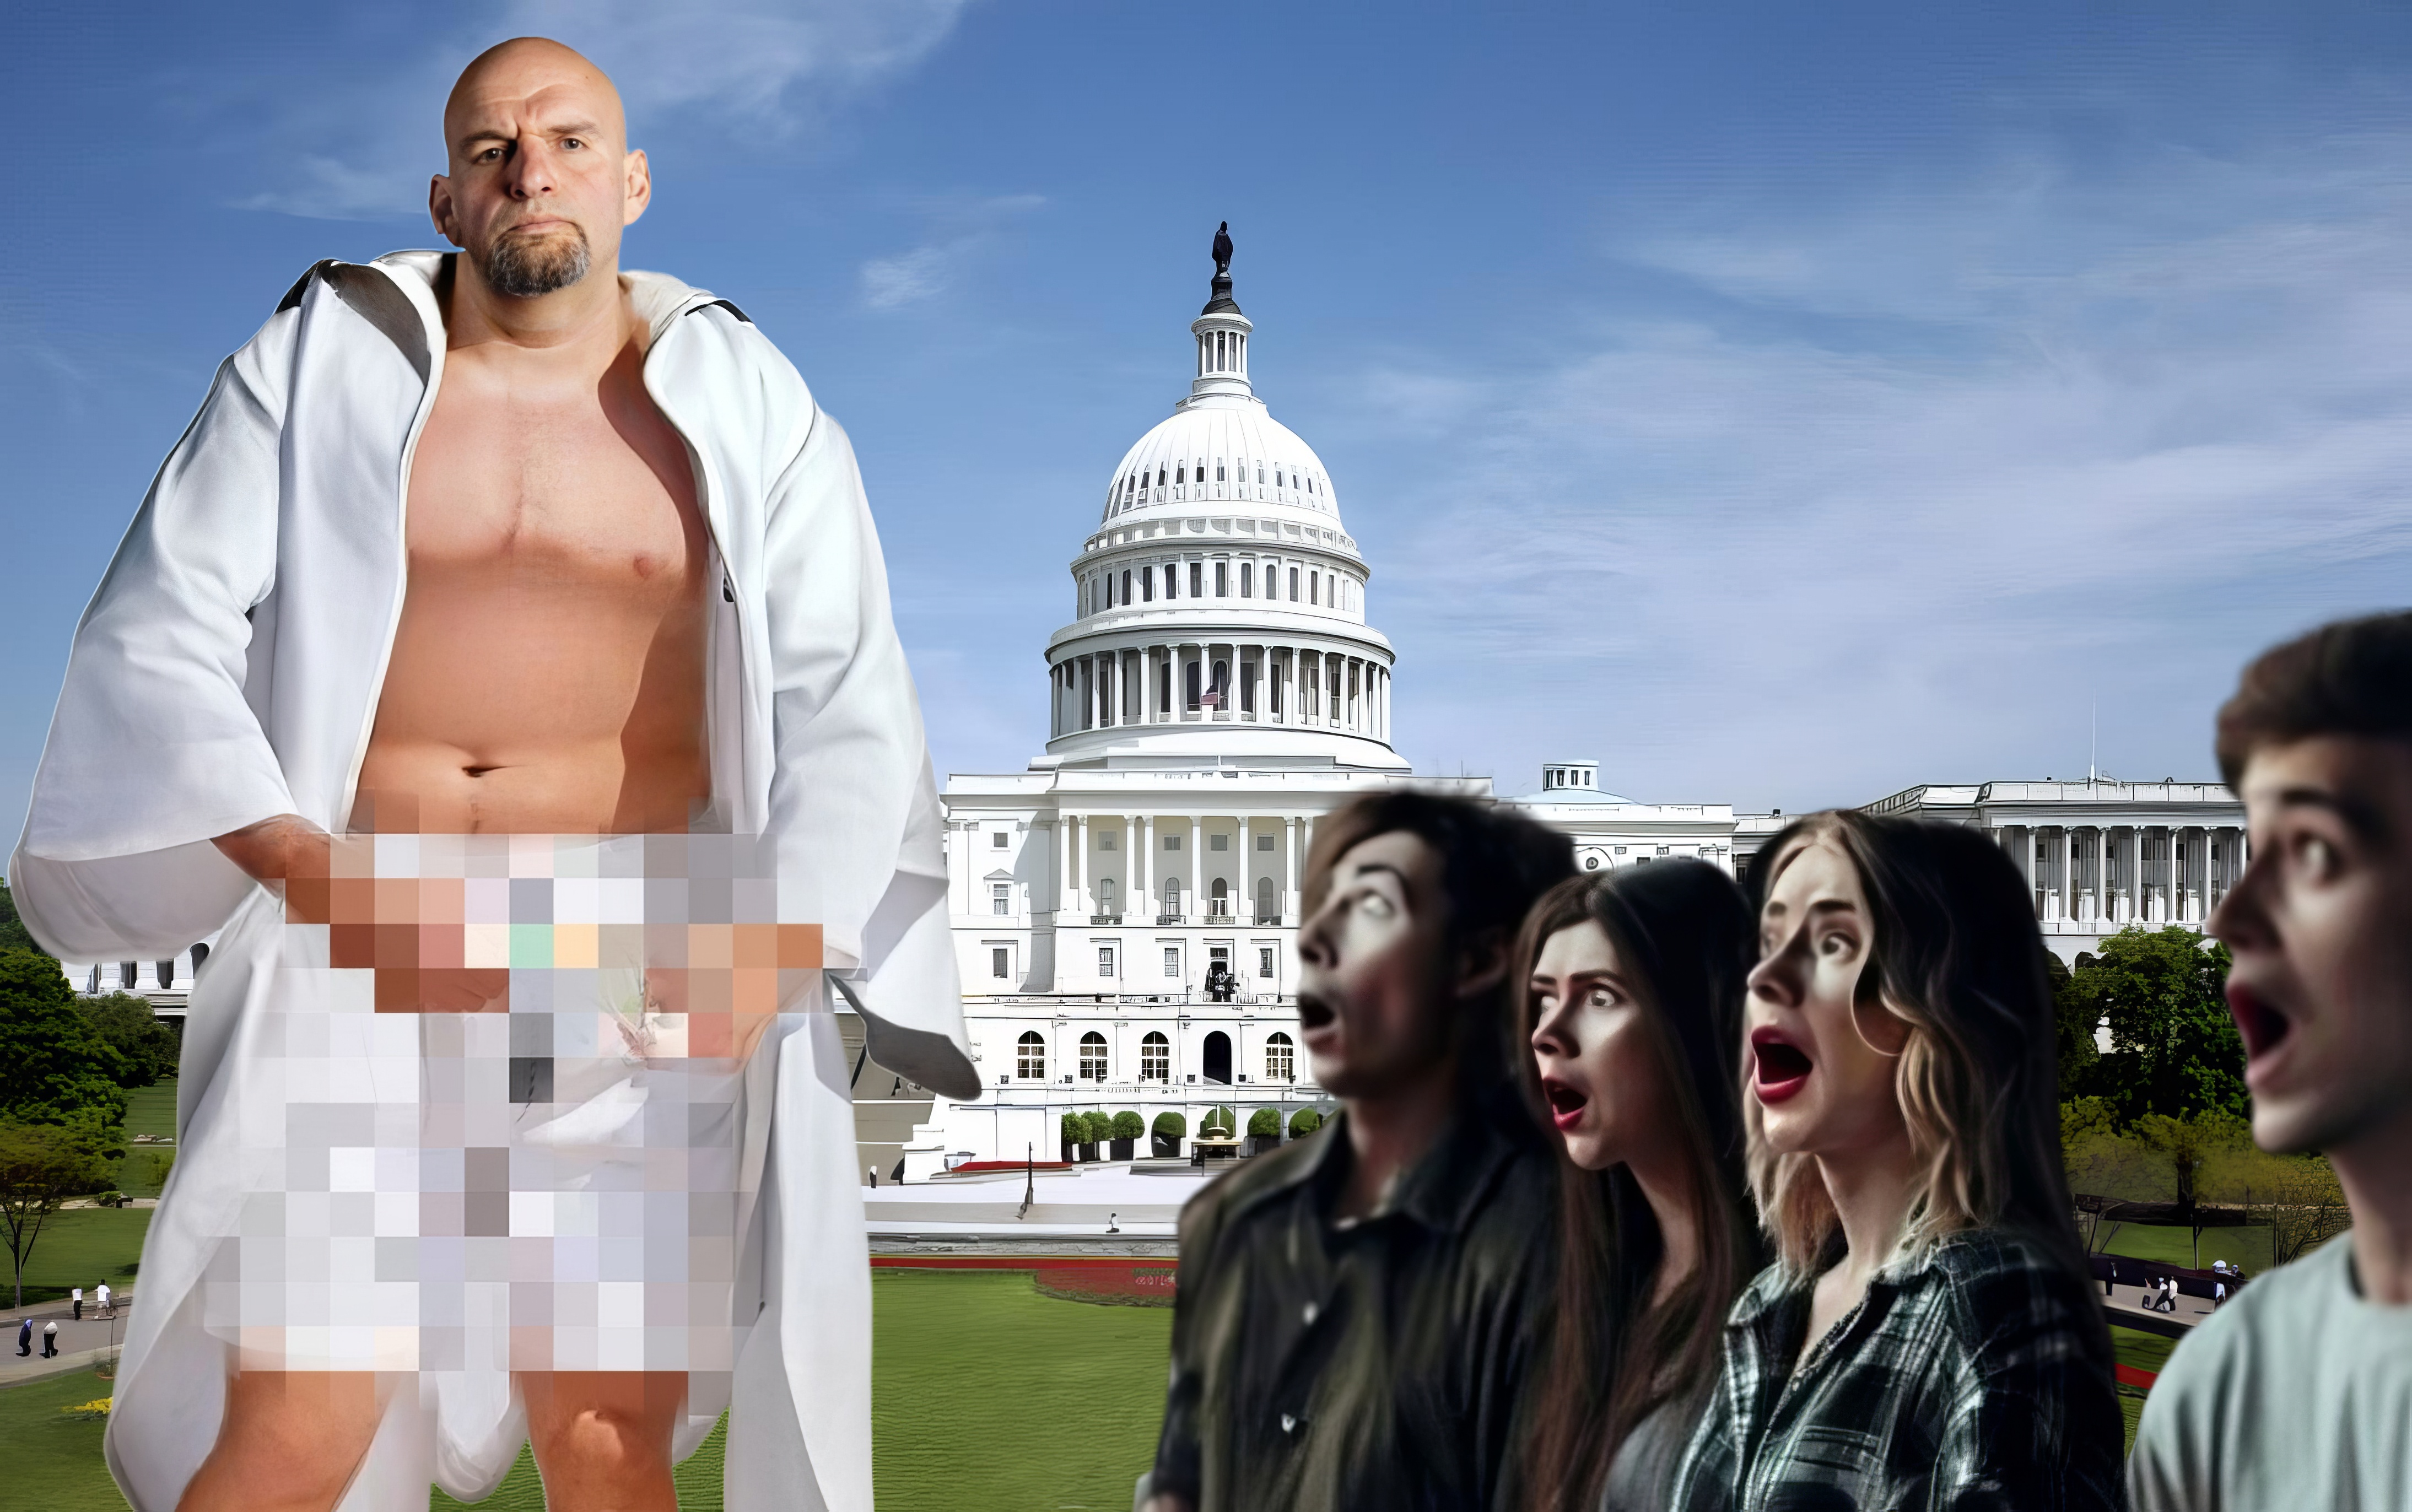 John Fetterman in a bathrobe with a pixelated crotch. Young people stare in horror. Background is the Capitol building.